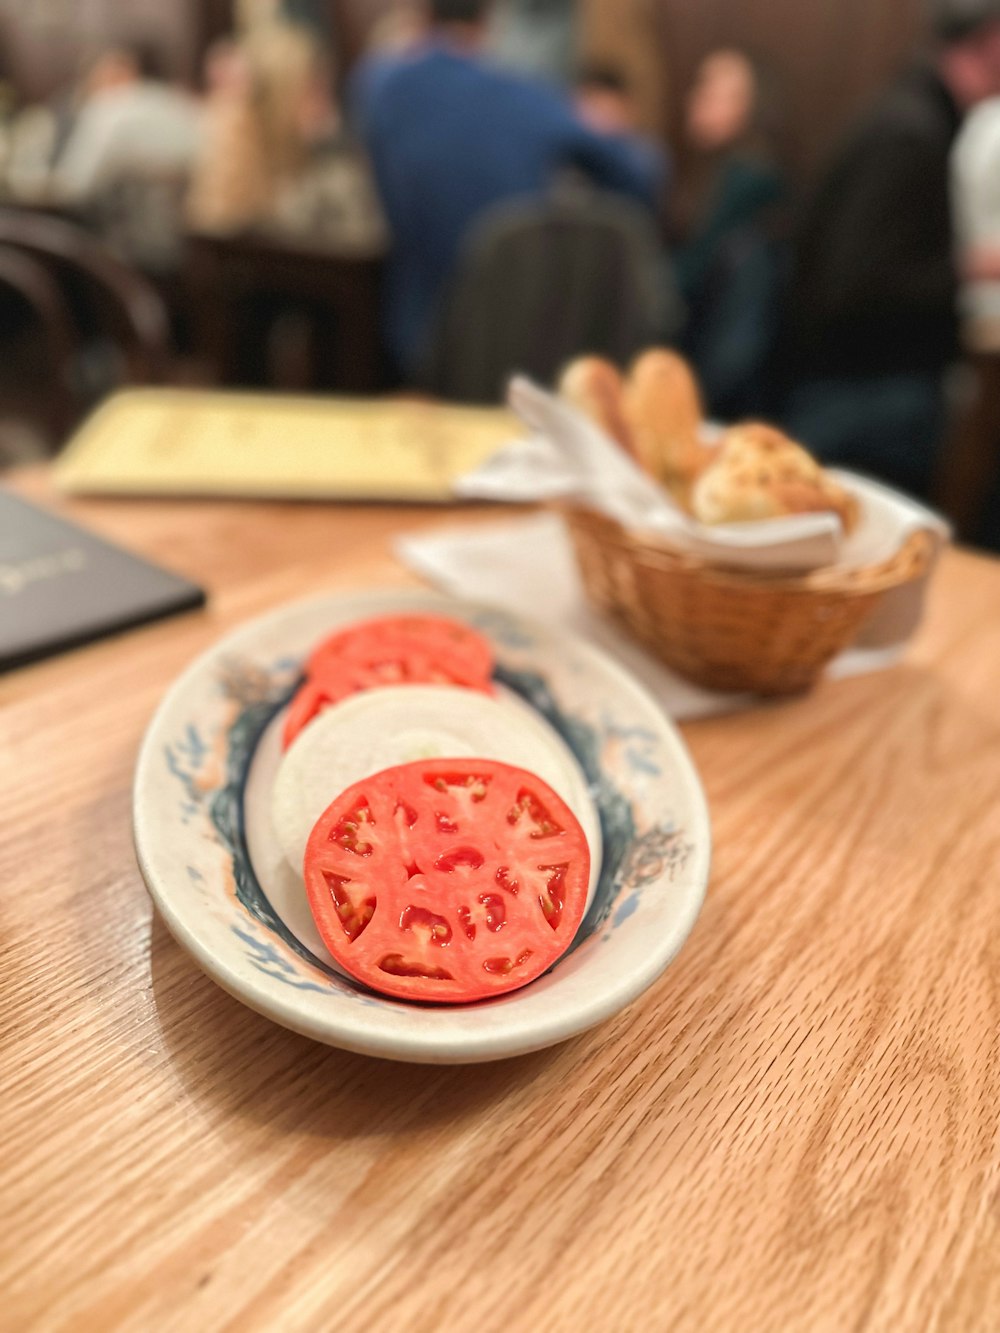 a plate of food on a table in a restaurant